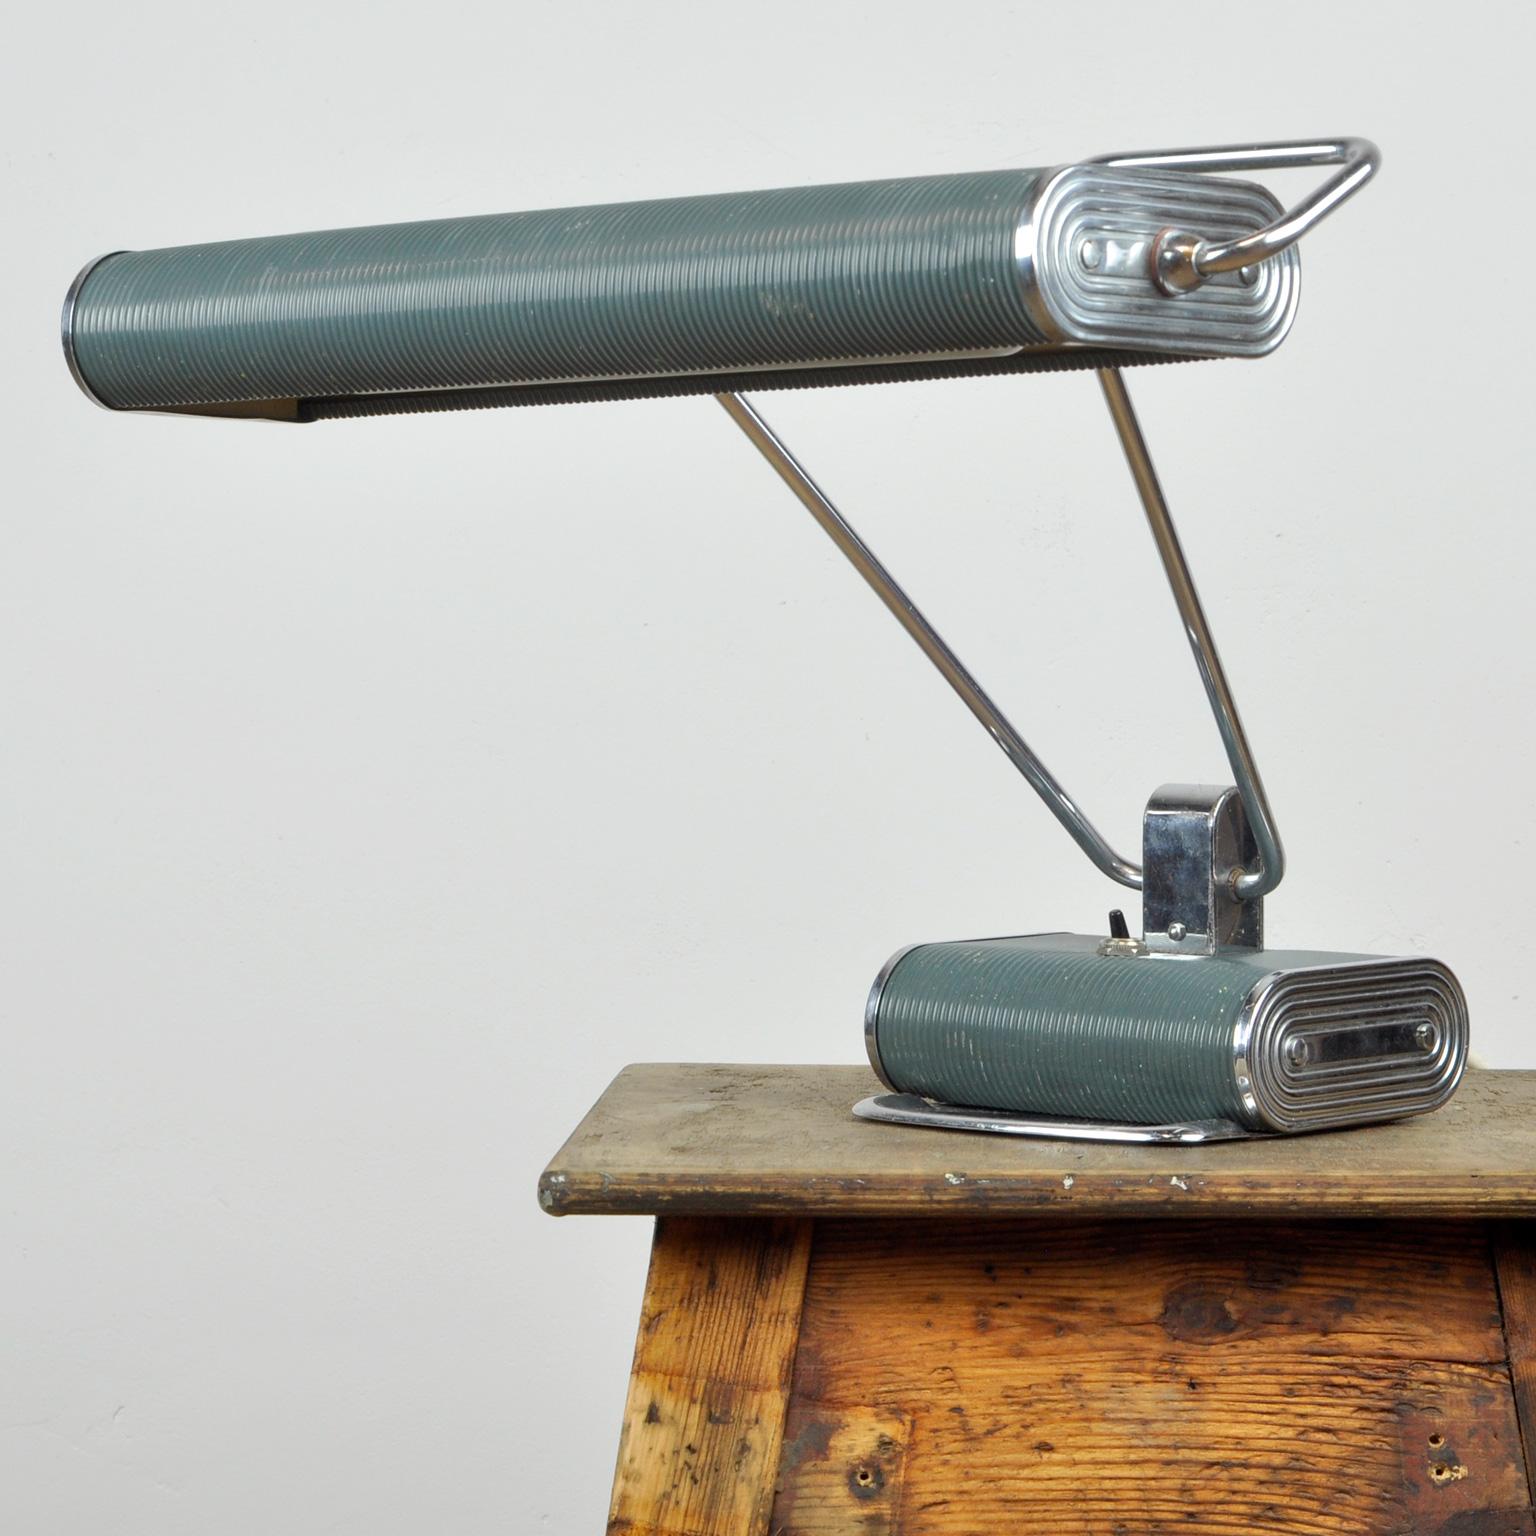 This lamp was designed by Eileen Gray for Jumo in France circa 1950. The lamp consists of corrugated steel and the original grey-painted and chromed brass pipe. The long double arm can be tilted forward as well as backward and the wide reflector